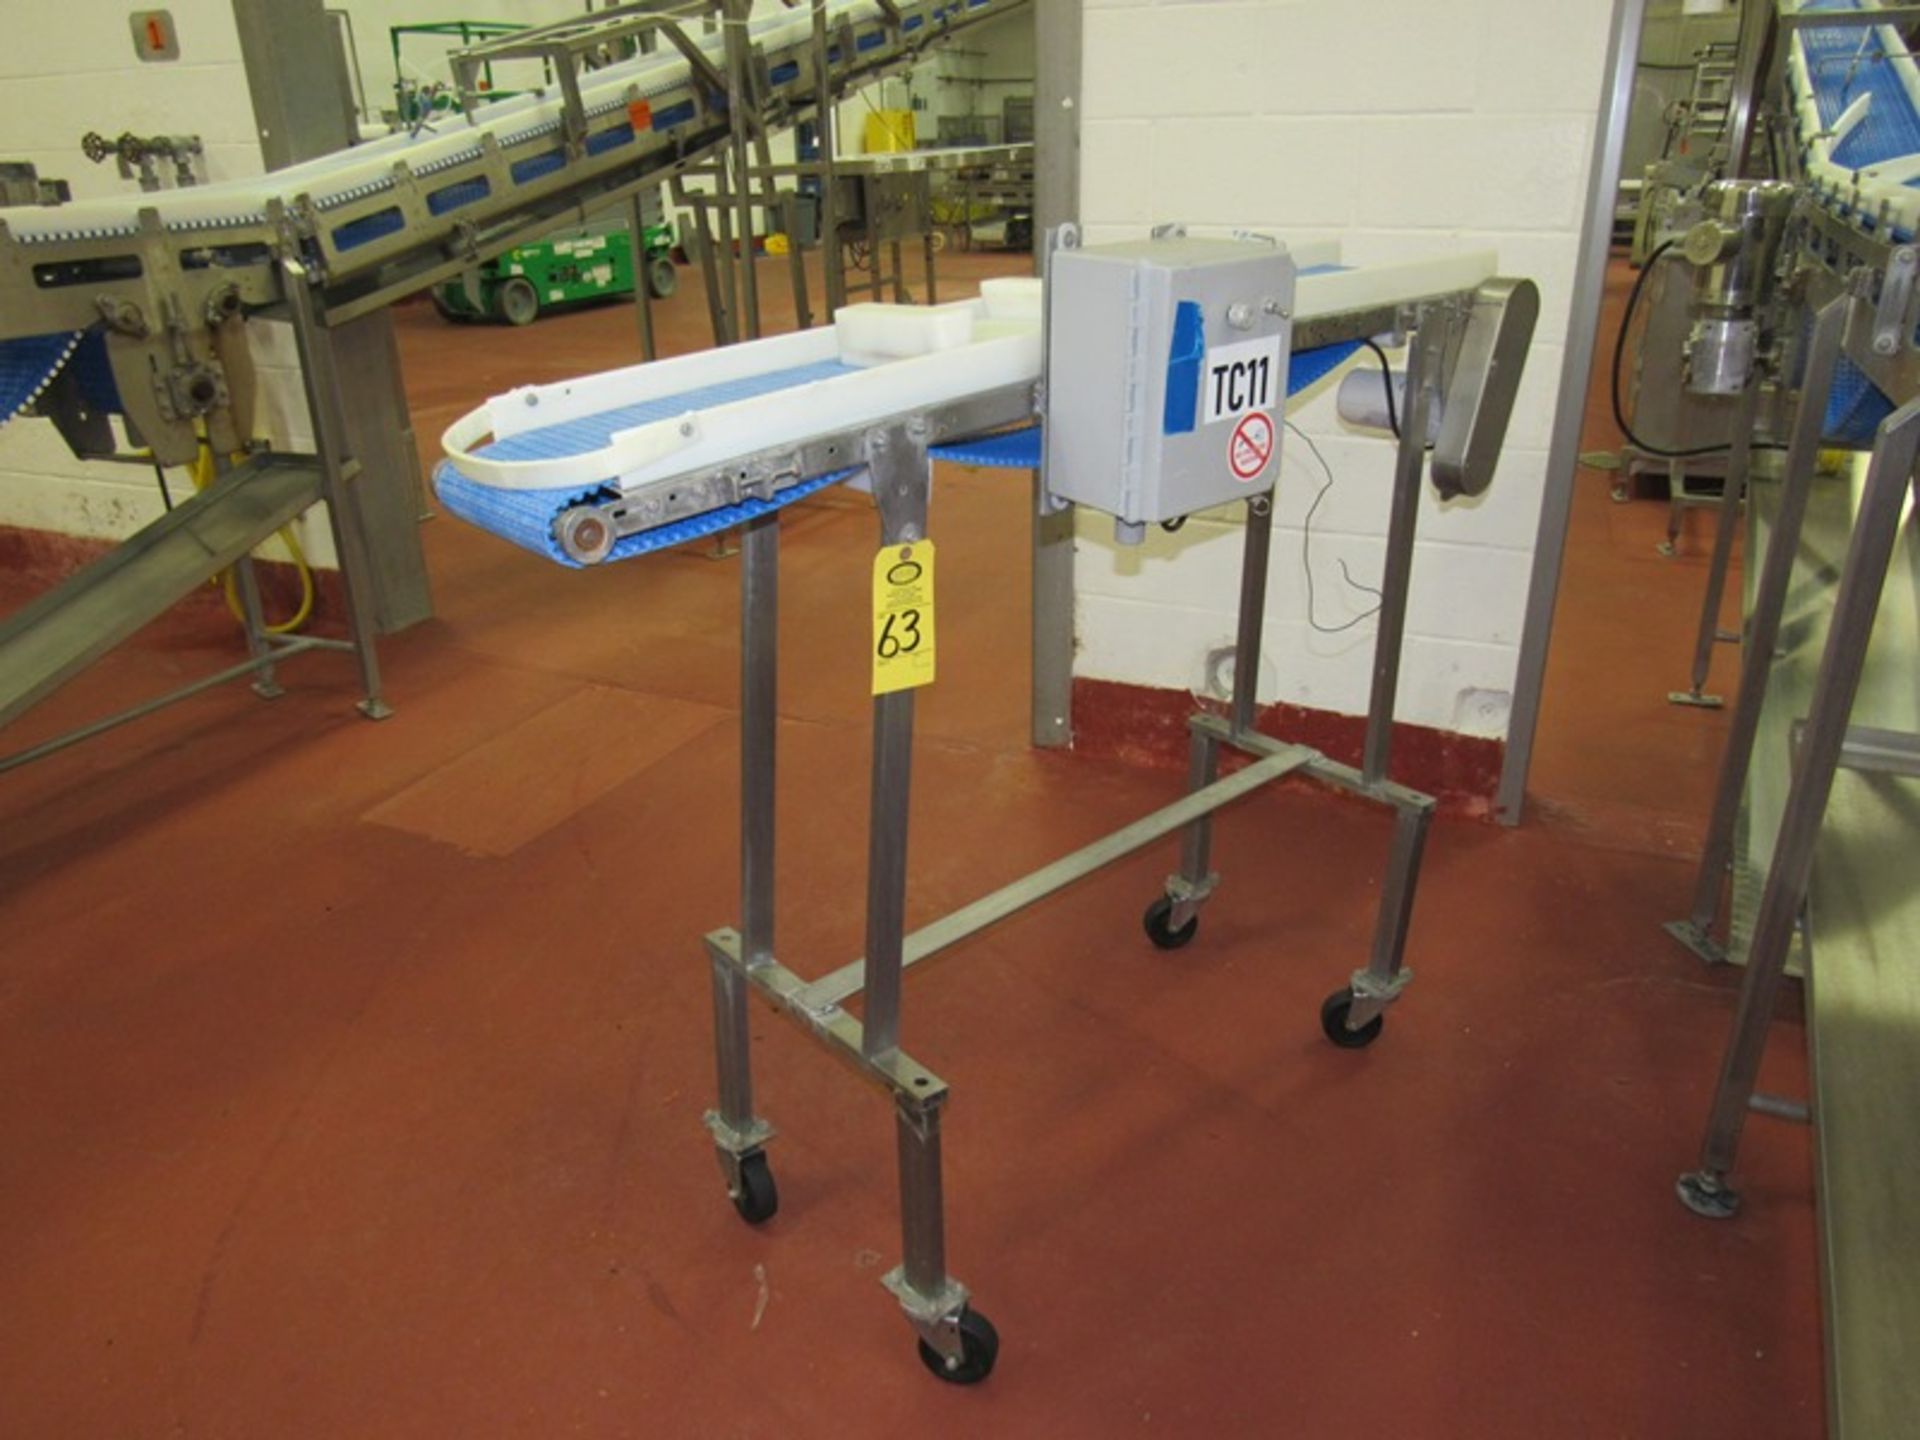 Portable Stainless Steel Conveyor, 9 1/2" W X 5' L, no drive (Required Loading Fee $50.00 Norm